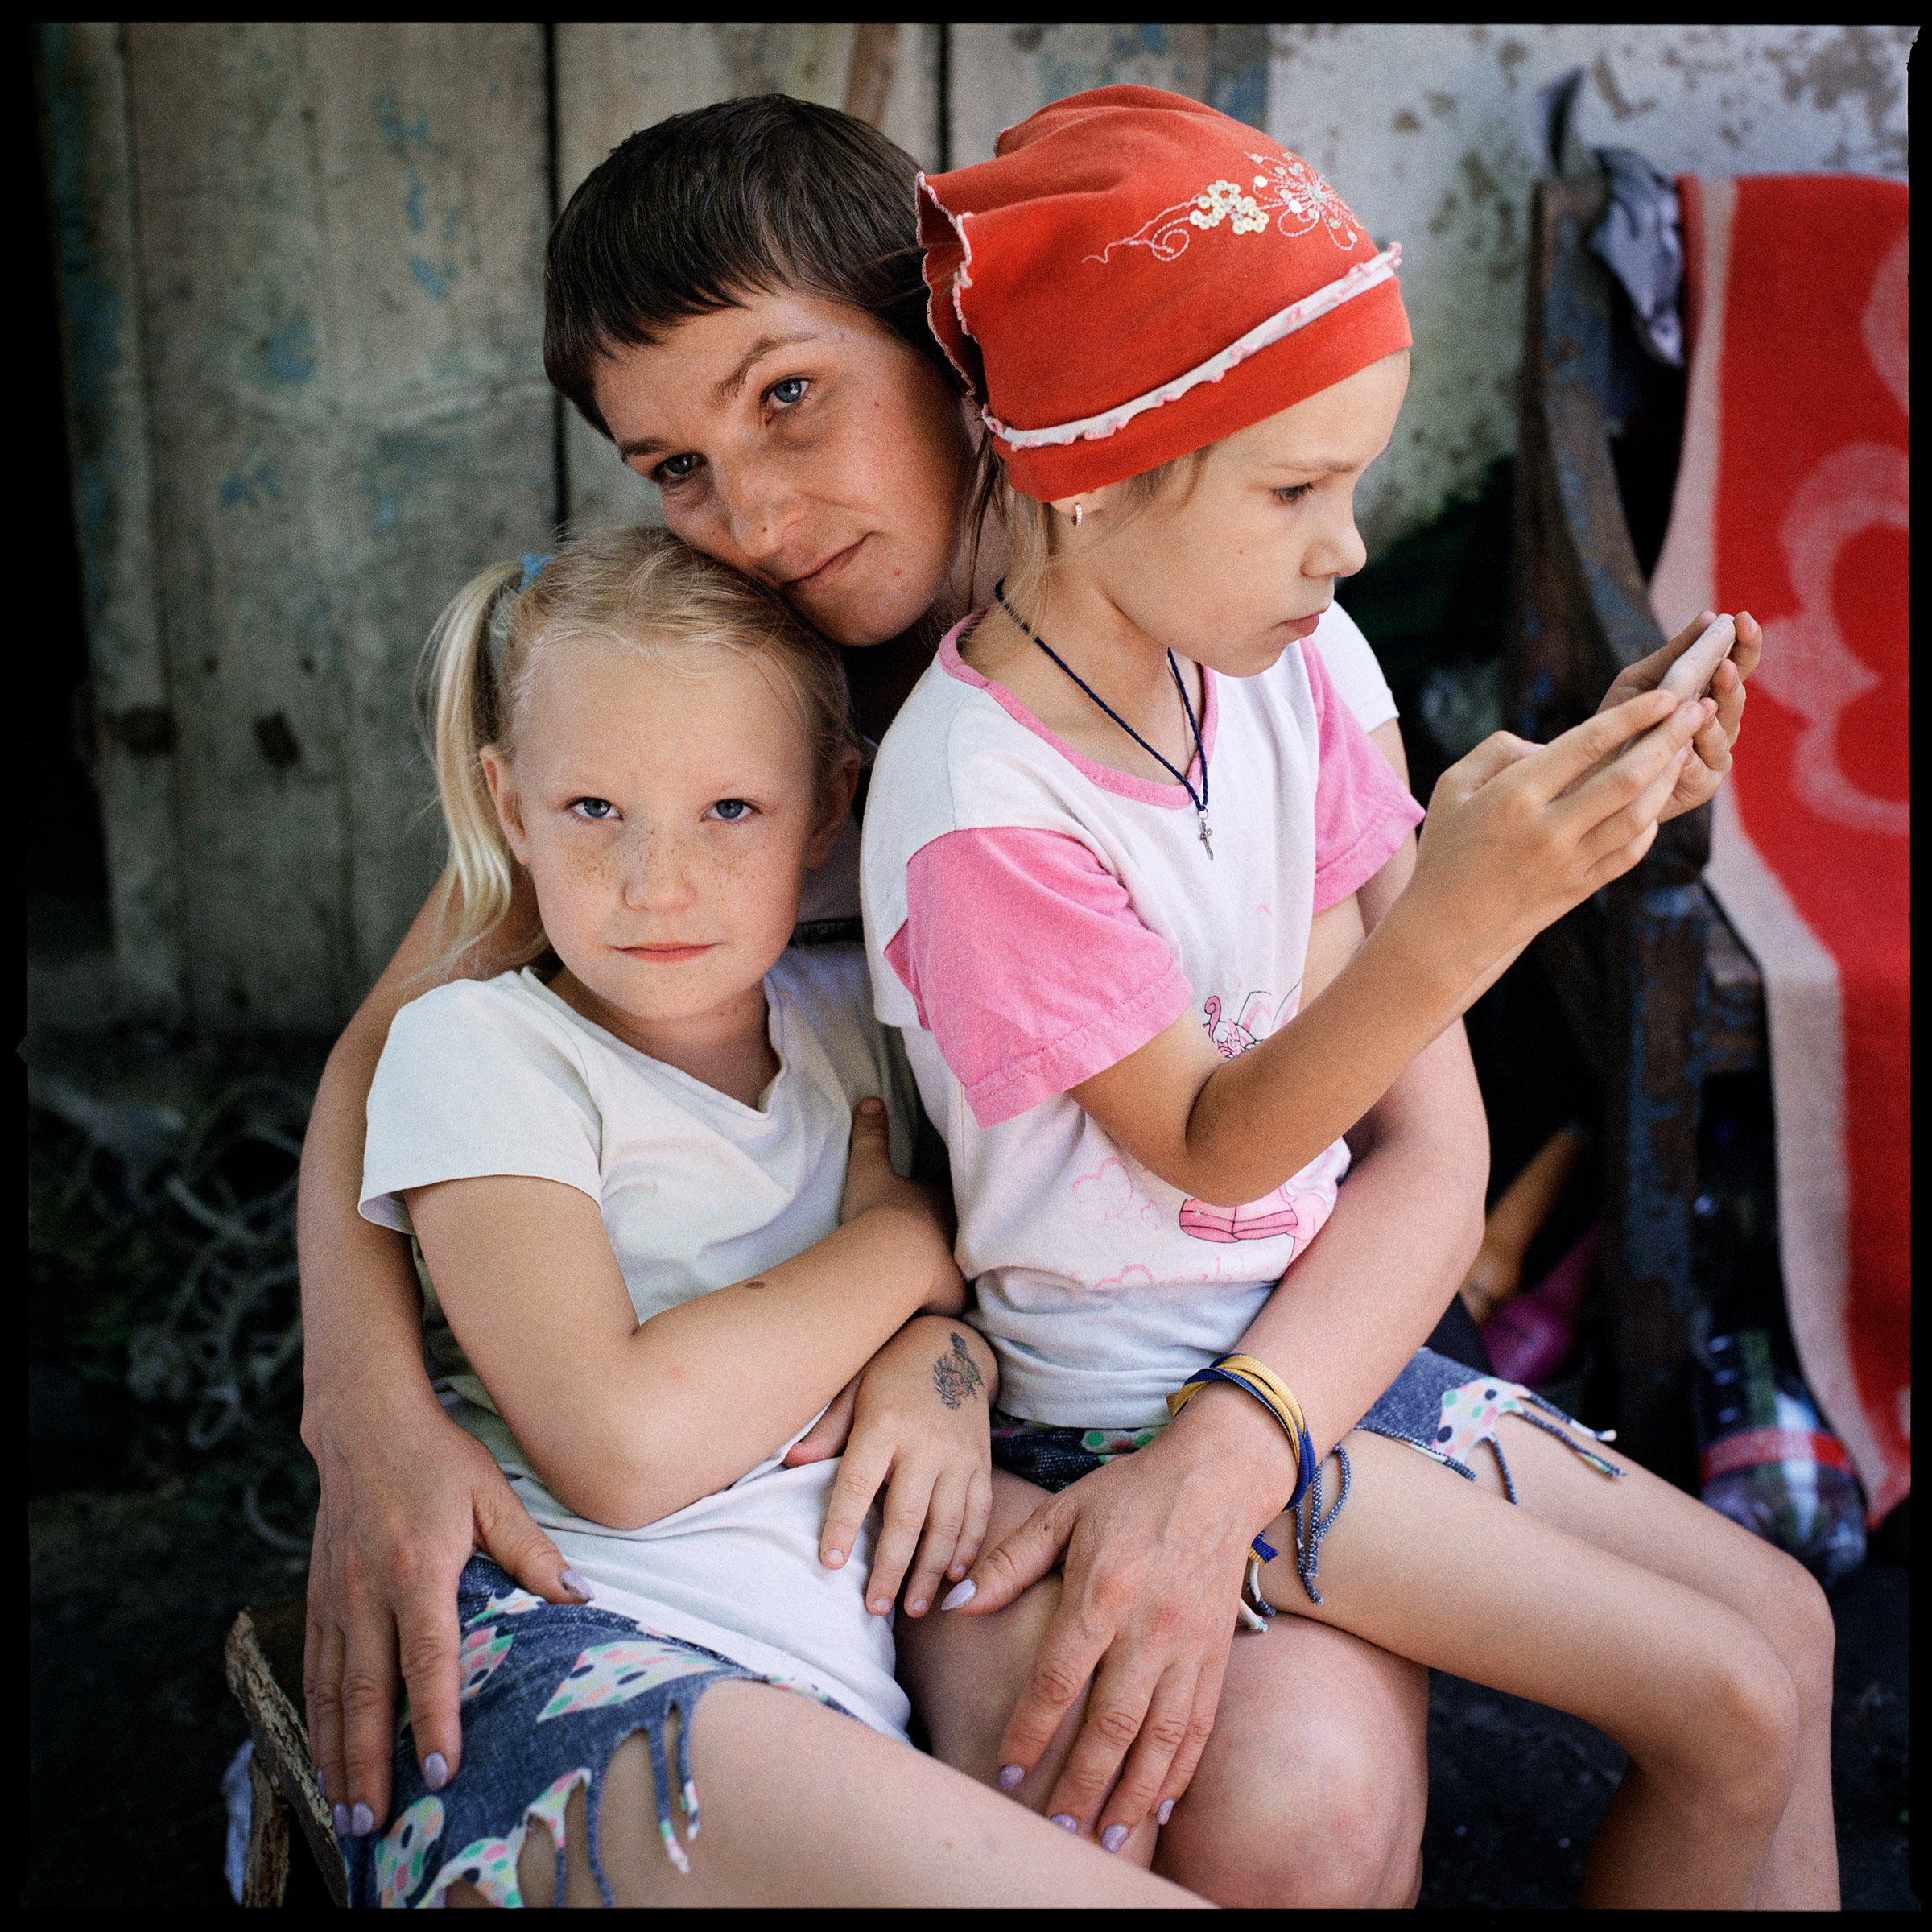 Olga Grinik, her daughter Miroslava, left, and her niece's daughter Angelina Drobysh, right, in Poltava region, where the family fled to escape the war, on June 29, 2022. Avdiivka, the Grinik family's hometown, has seen fierce fighting. The family recently learned that their house has been destroyed, along with much of the town. (Anastasia Taylor-Lind)